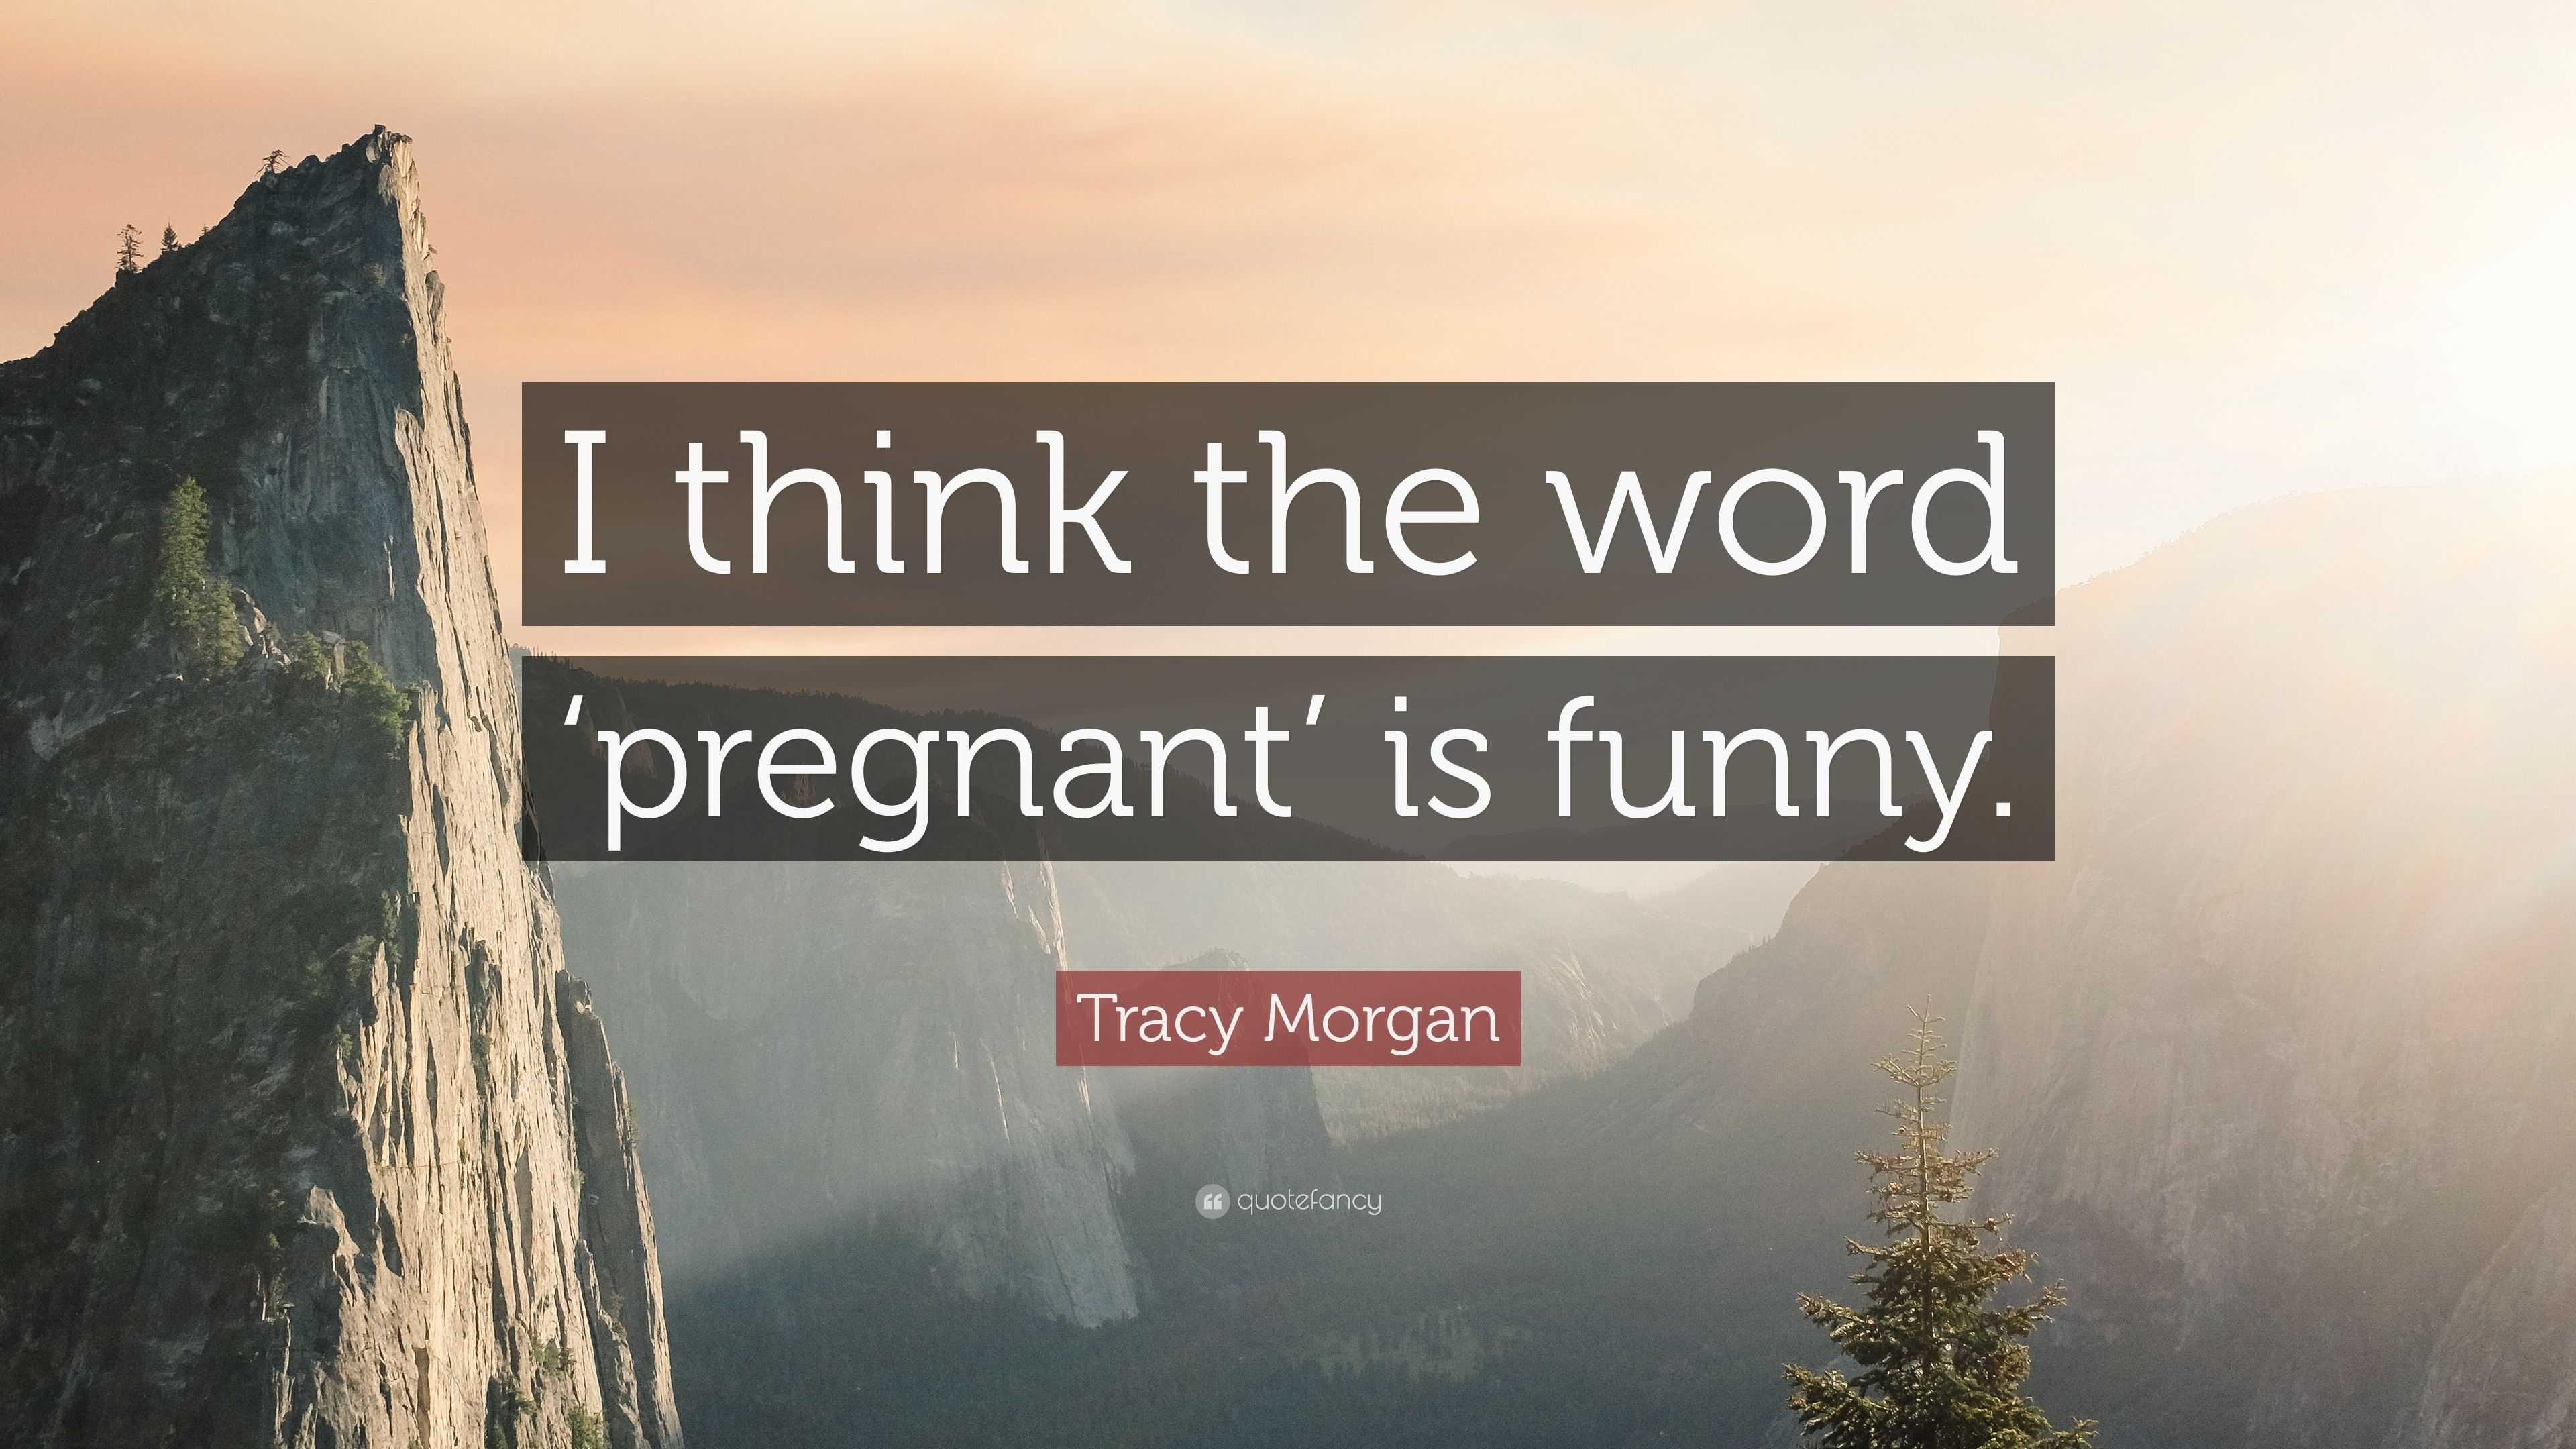 Tracy Morgan Quote: “I think the word 'pregnant' is funny.”